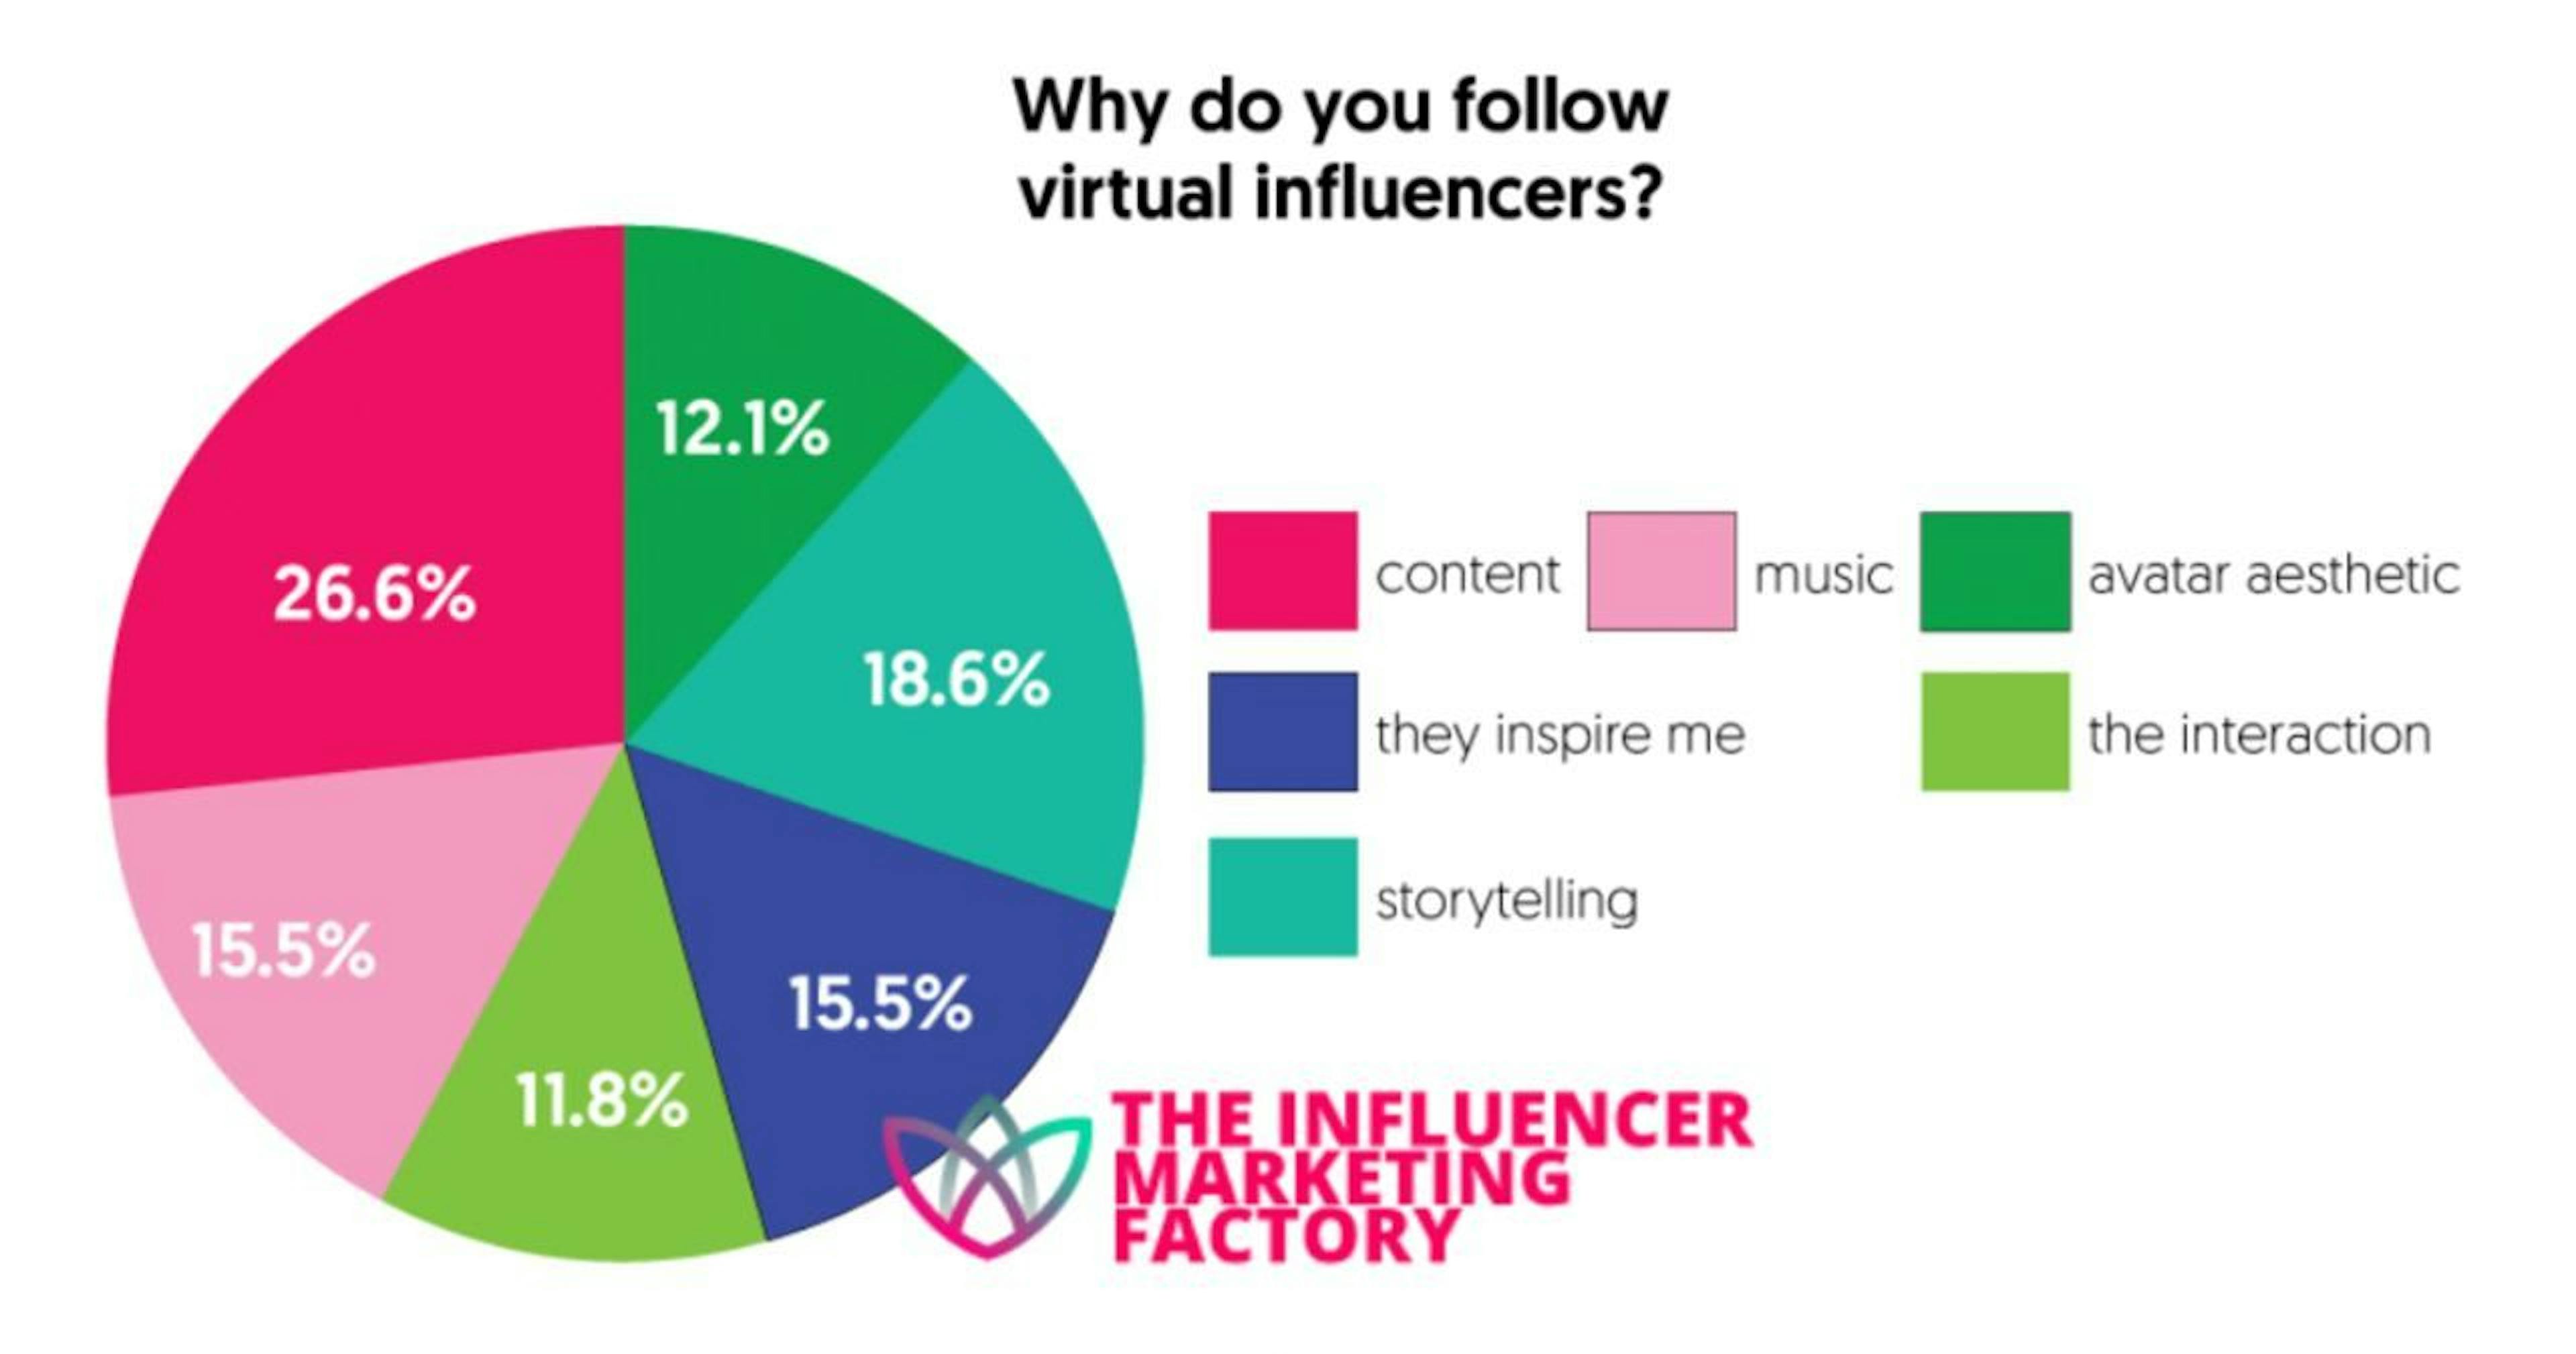 Taken from The Influencer Marketing Factory